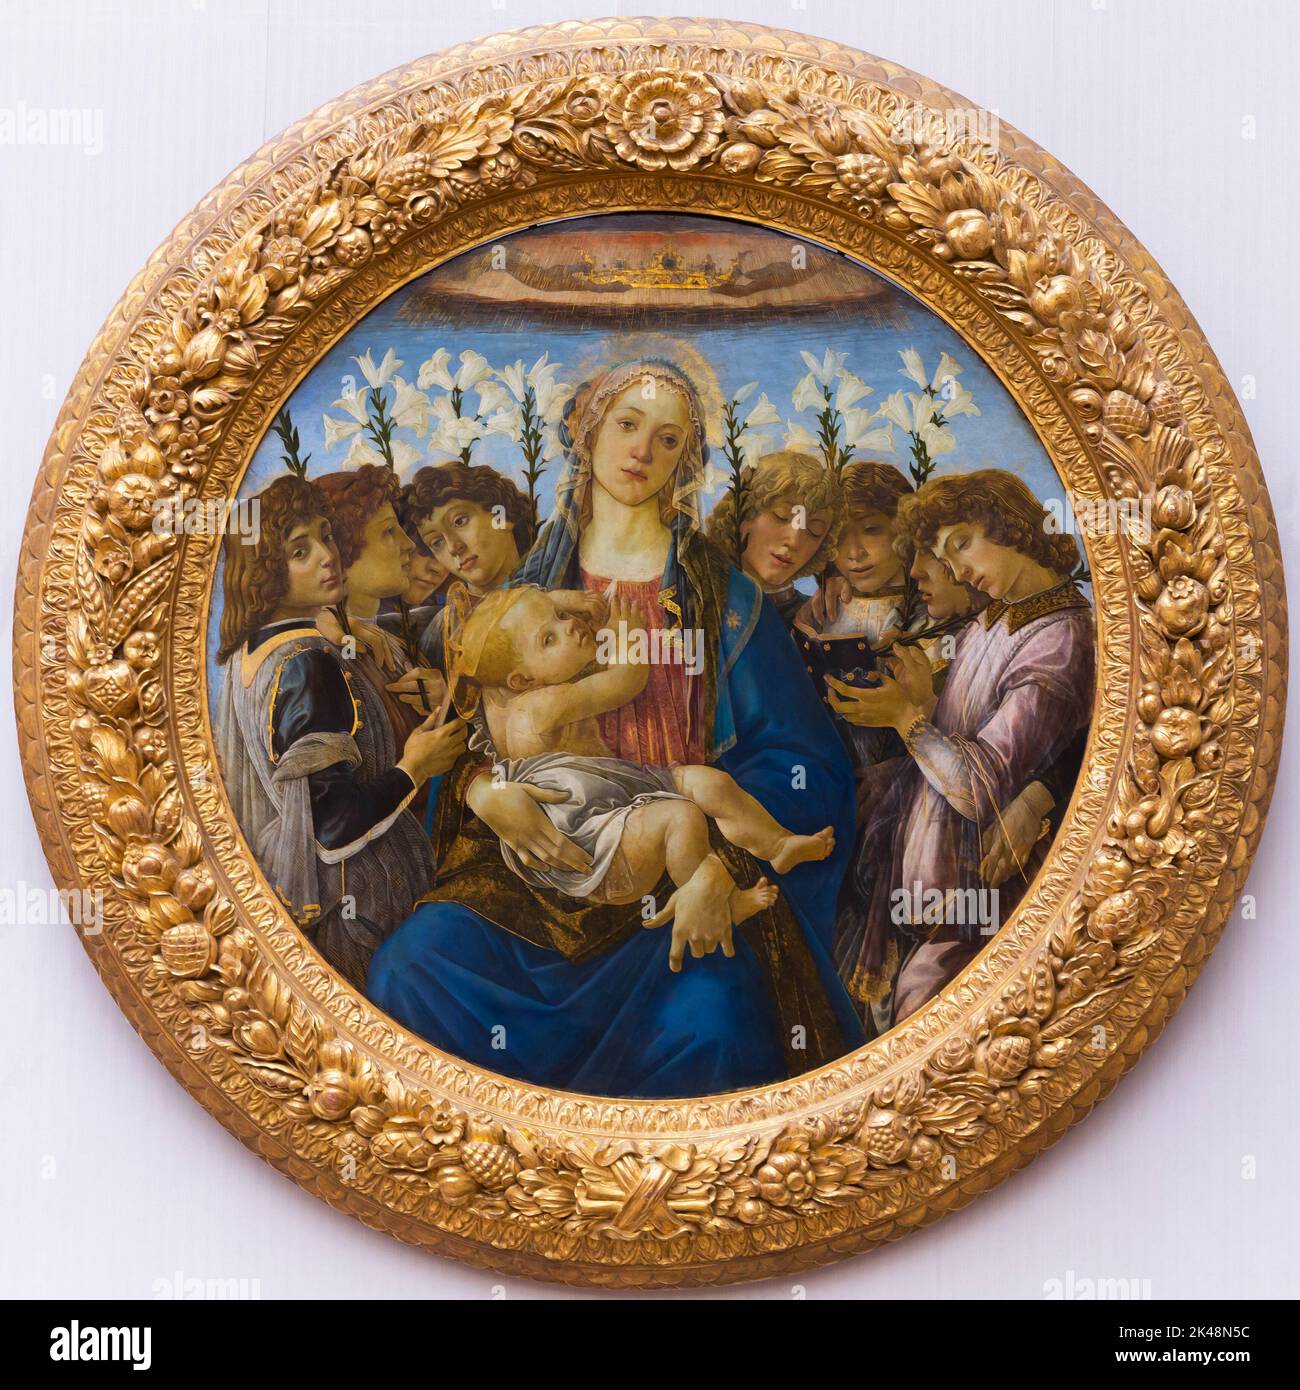 Mary and the Child with Singing Angels, Sandro Botticelli,  circa 1477, Gemaldegalerie, Berlin, Germany, Europe Stock Photo